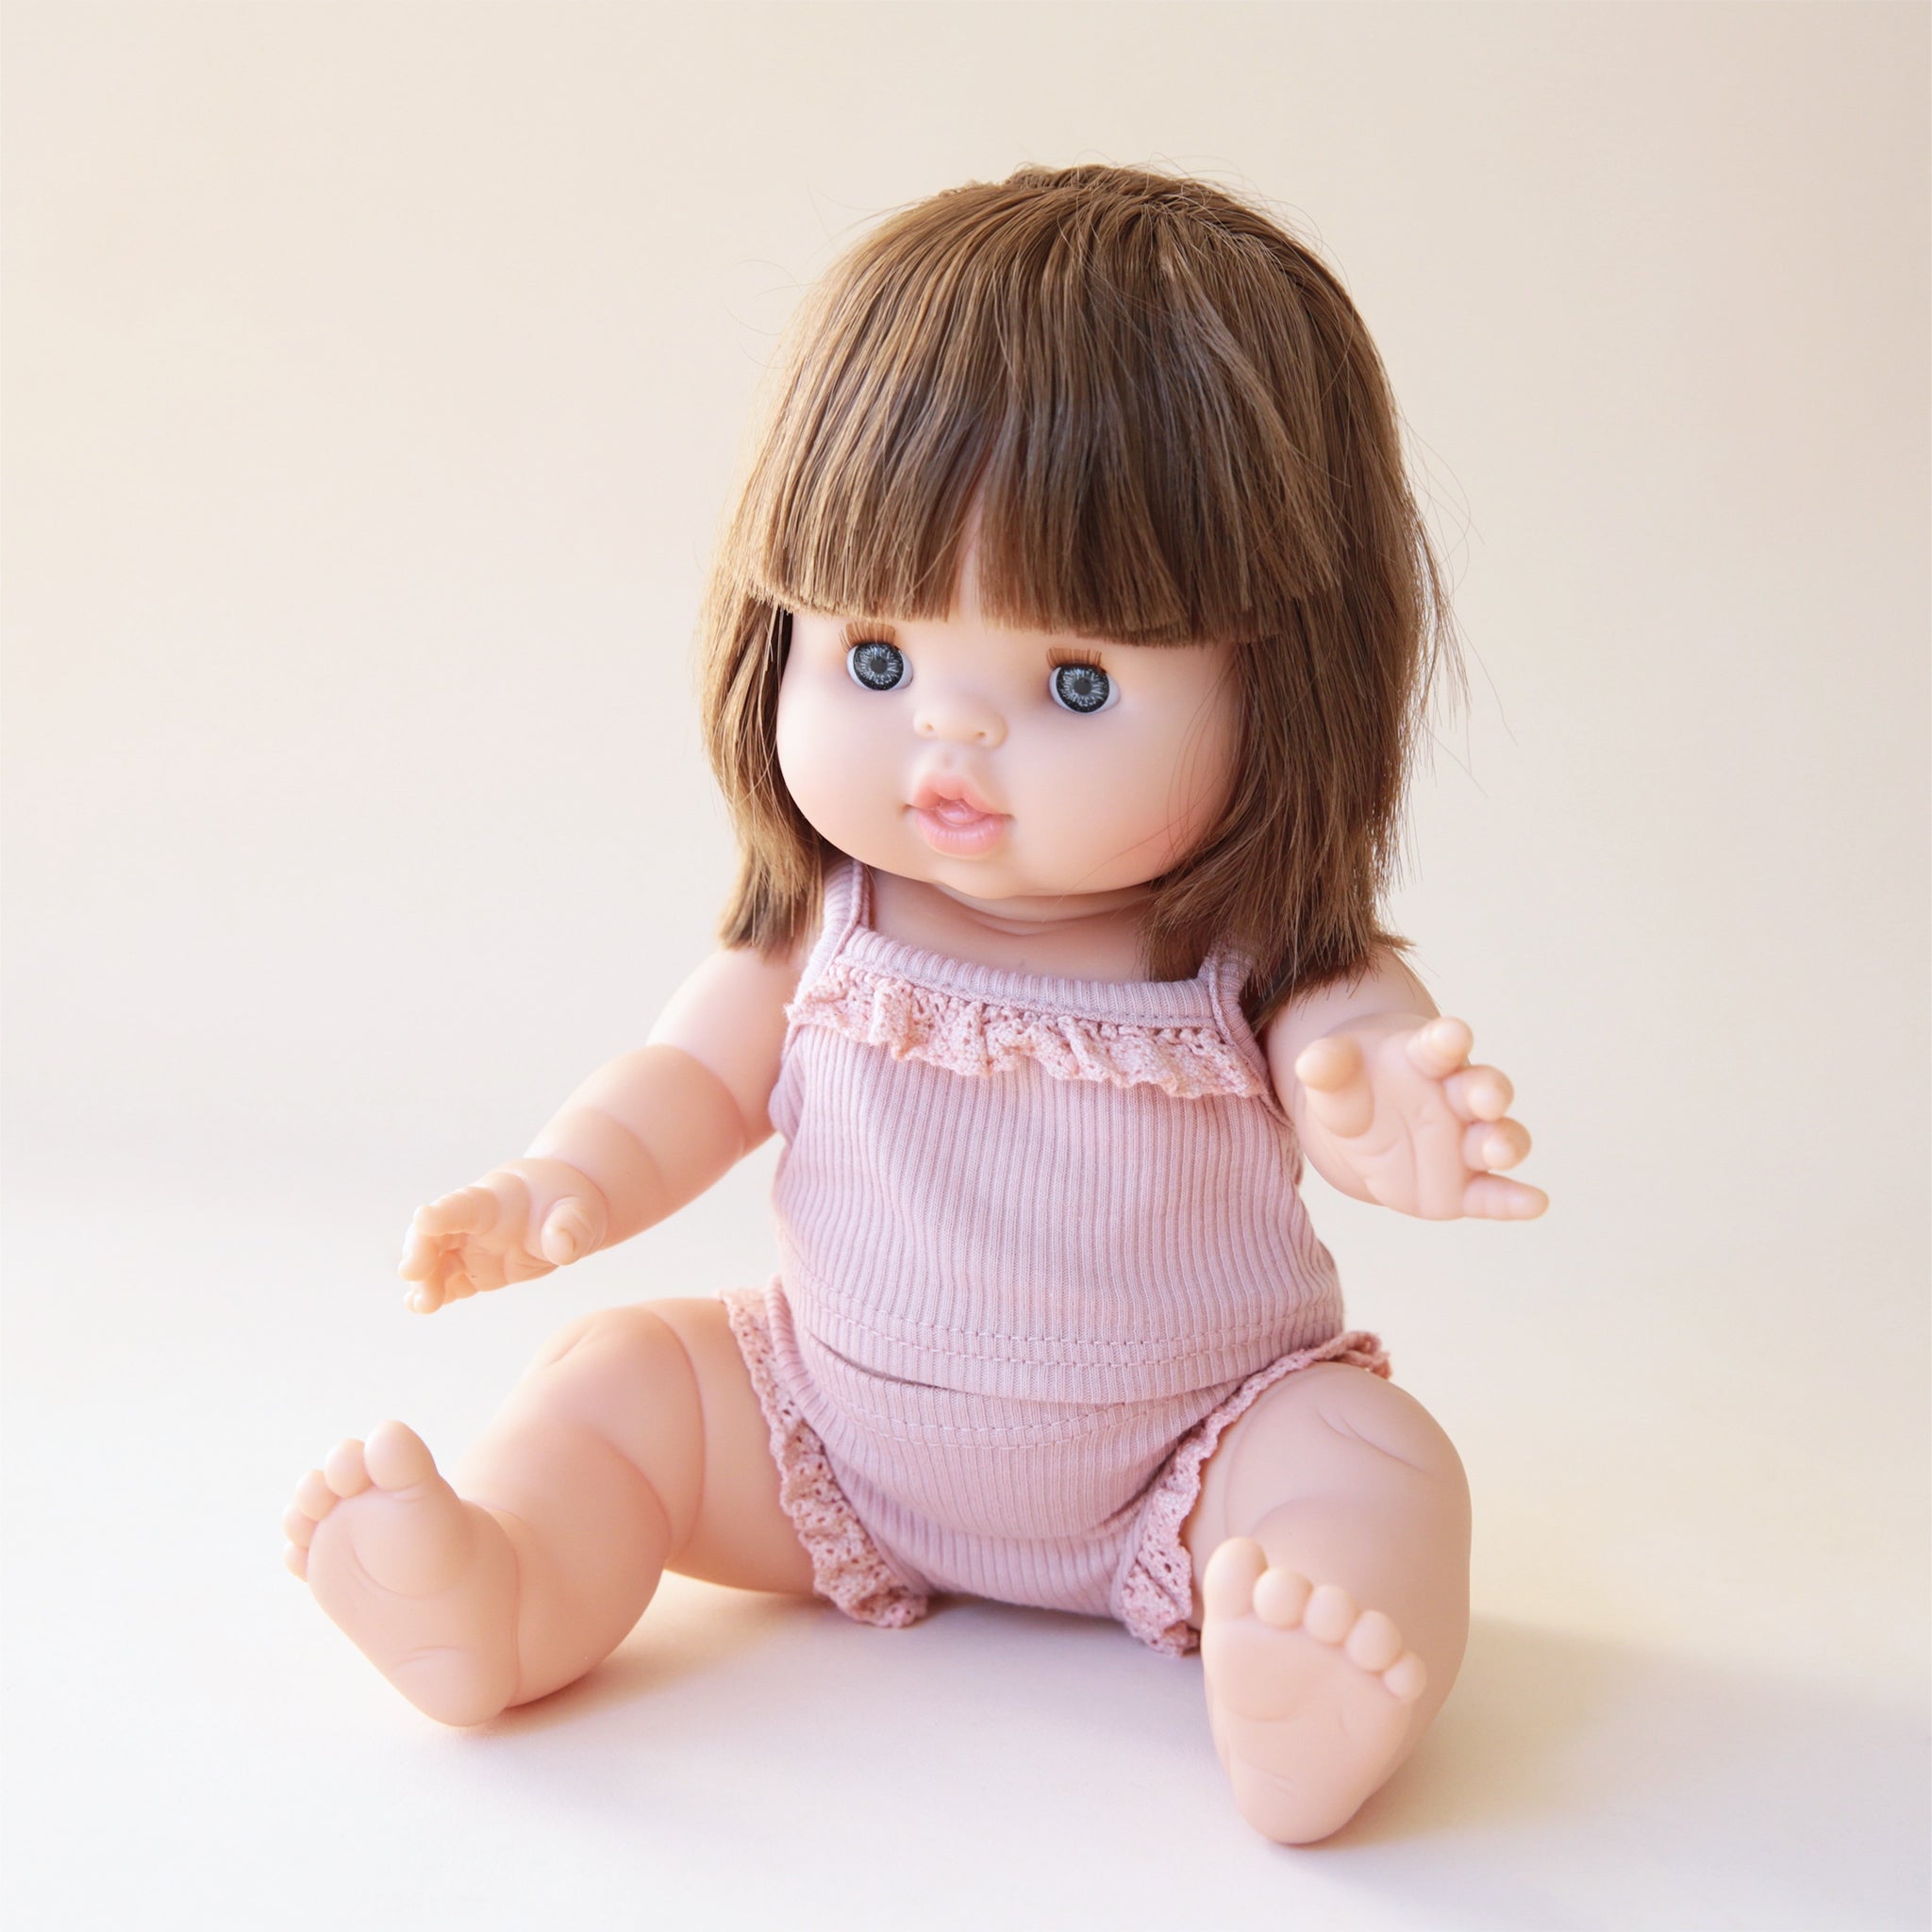 A baby doll with blue eyes, straight dark brown hair that is about shoulder length with bangs and wearing a light pink tank top set not included.